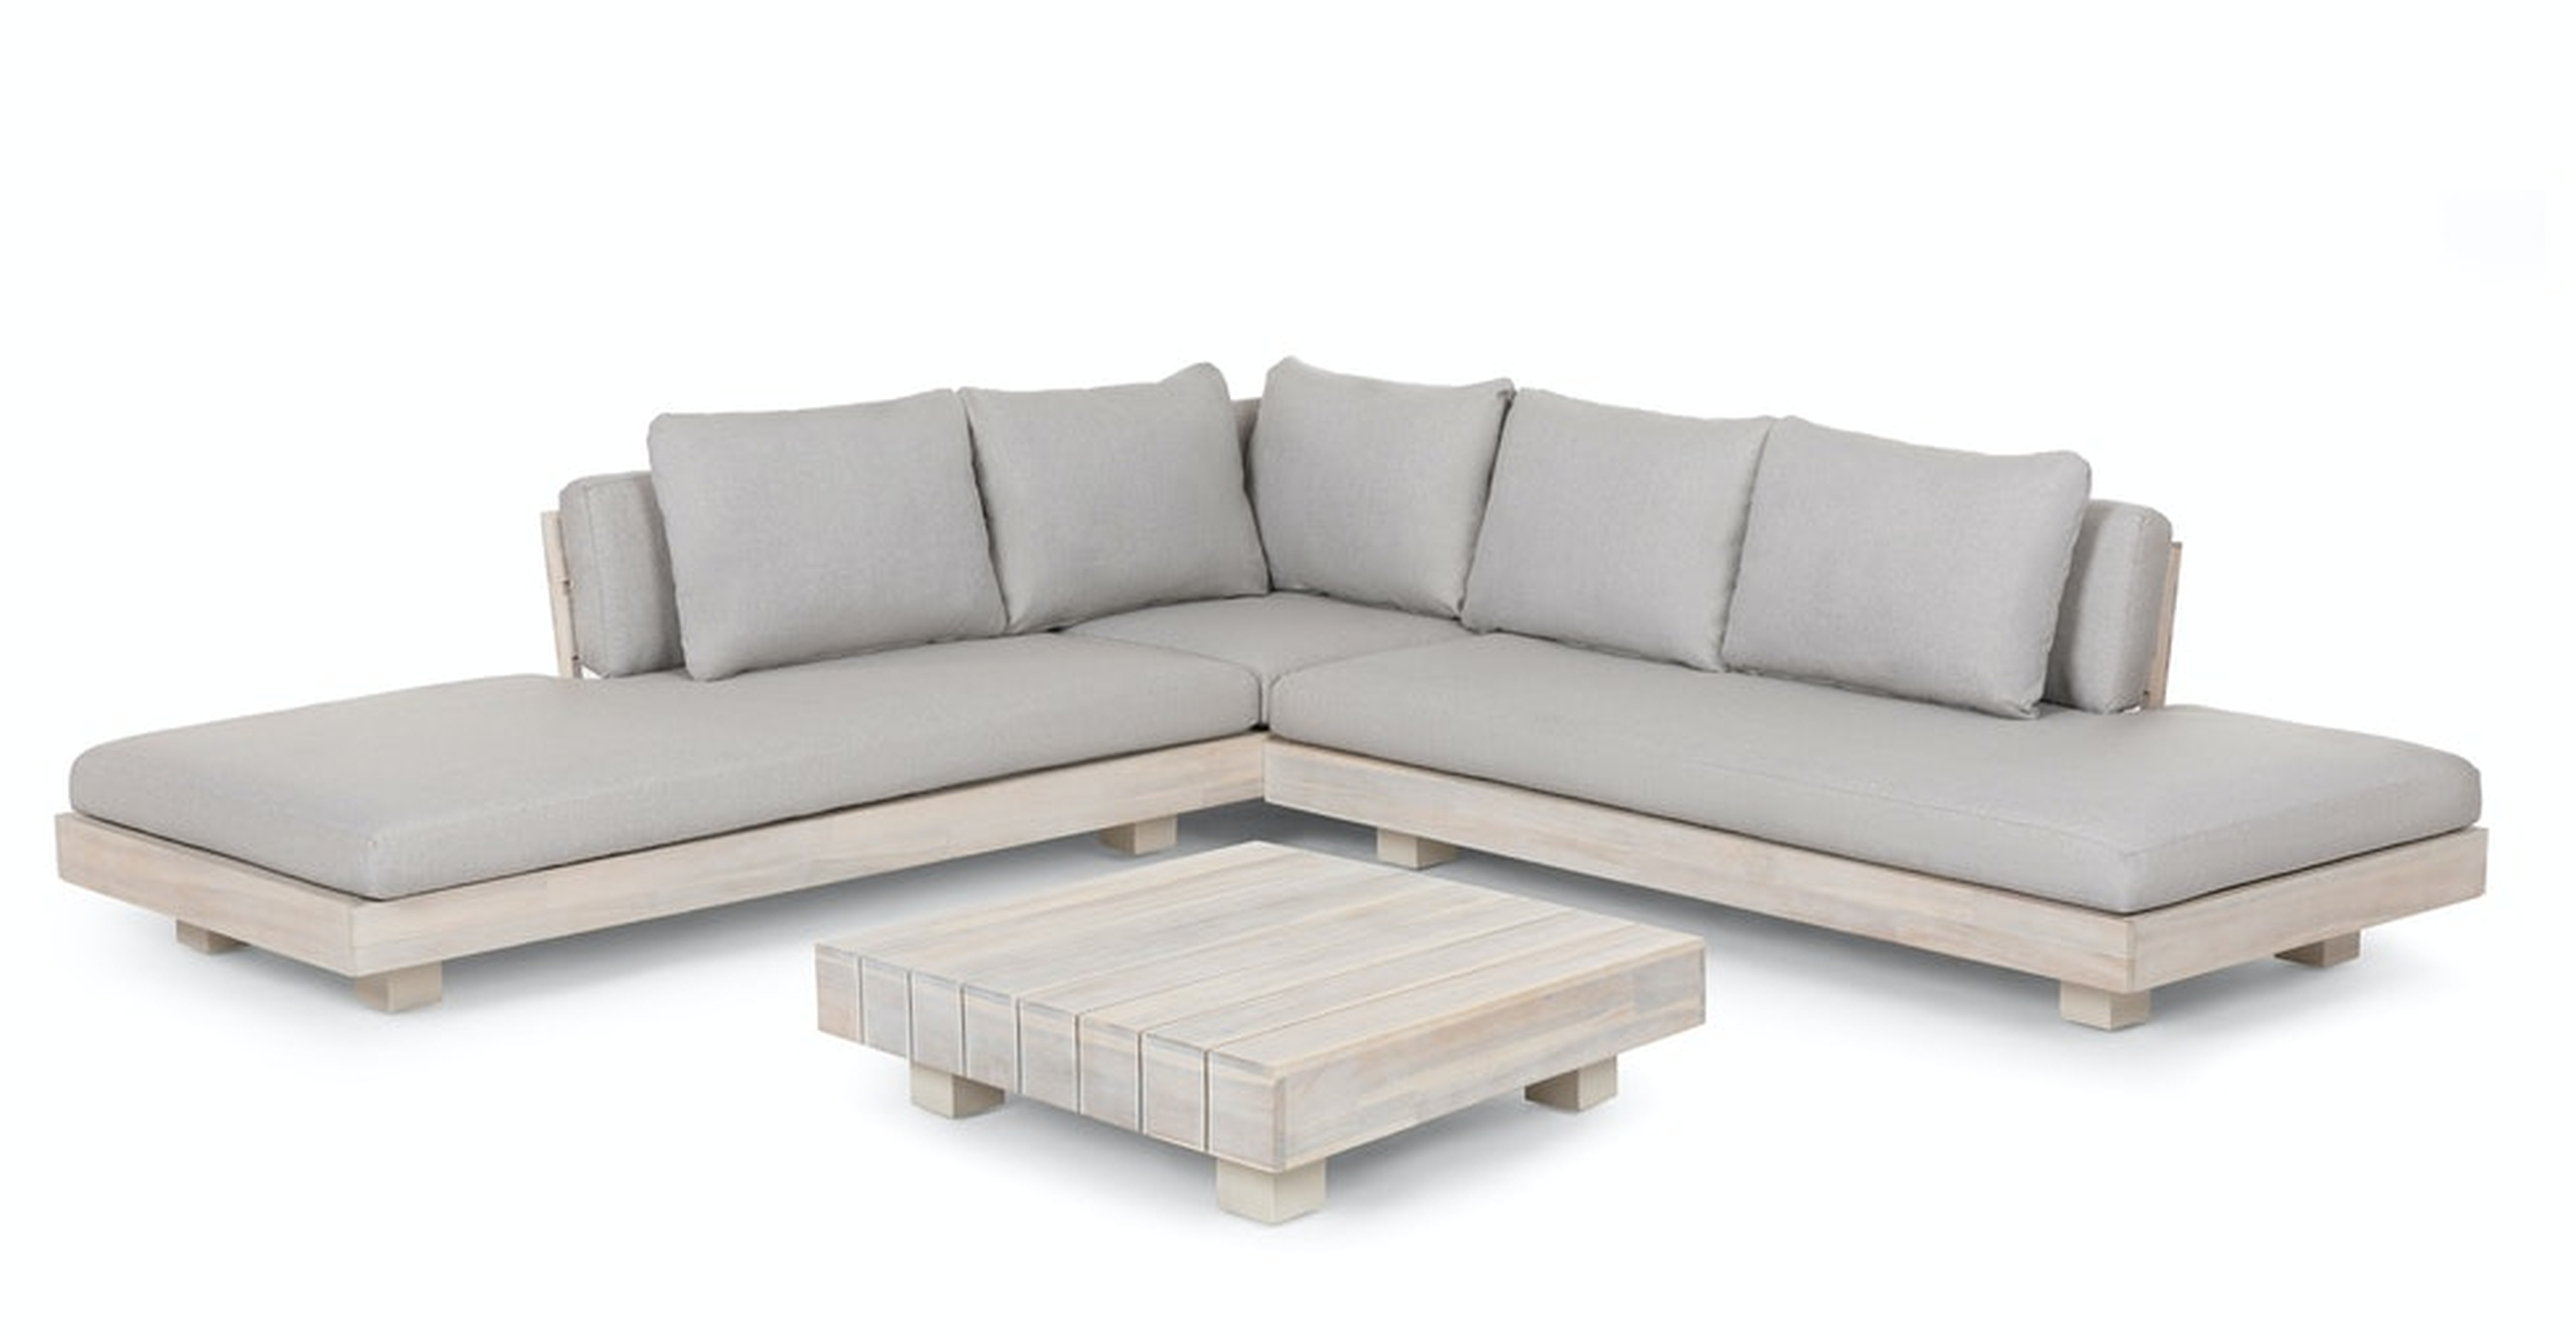 Lubek Beach Sand Low Corner Sectional Set - Article